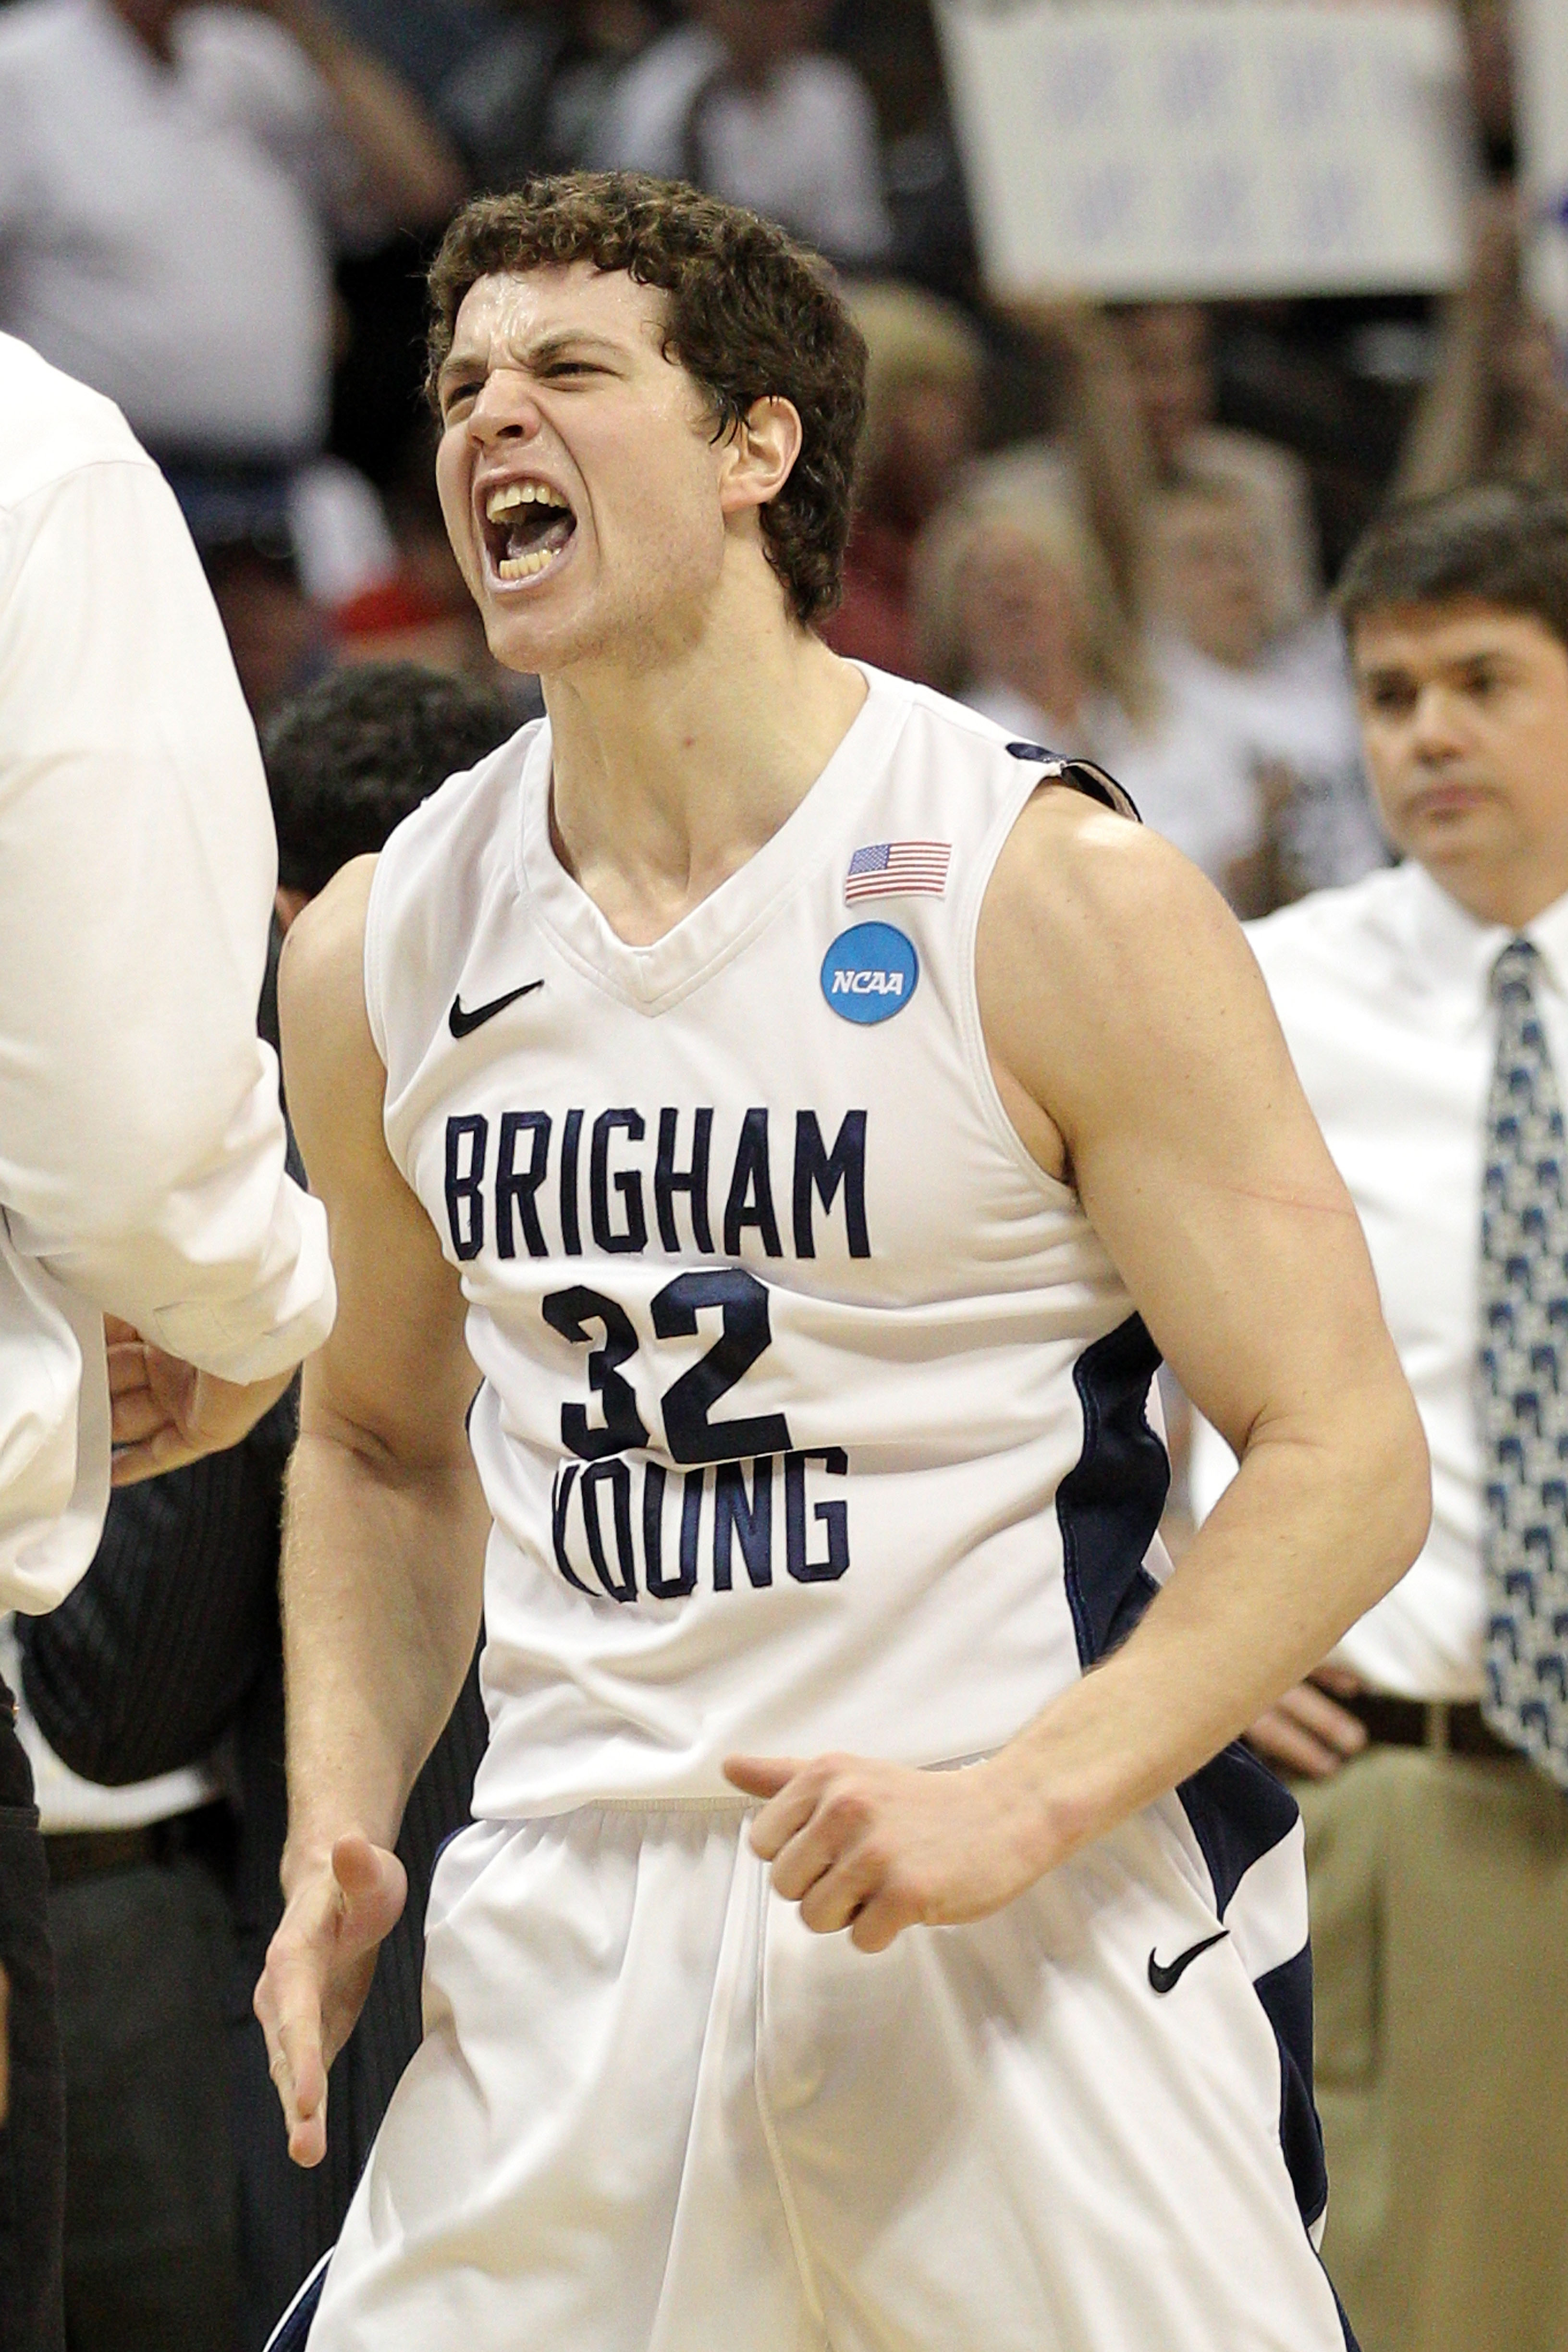 DENVER, CO - MARCH 19:  Jimmer Fredette #32 of the Brigham Young Cougars celebrates after a play against the Gonzaga Bulldogs during the third round of the 2011 NCAA men's basketball tournament at Pepsi Center on March 19, 2011 in Denver, Colorado.  (Phot